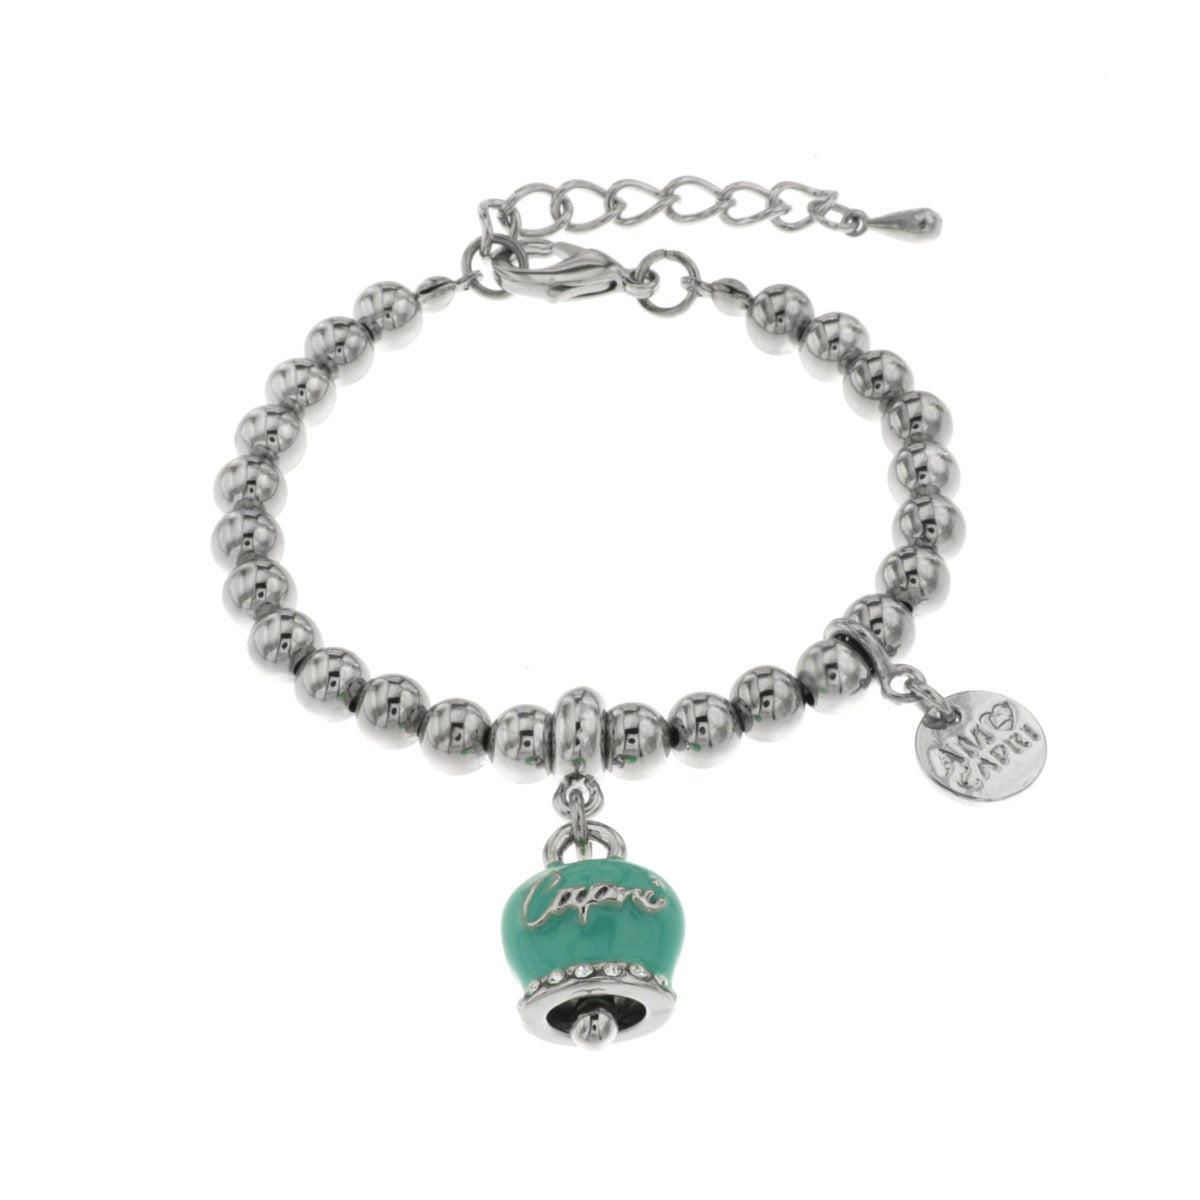 Metal bracelet with bell sea green pendant with capri writing